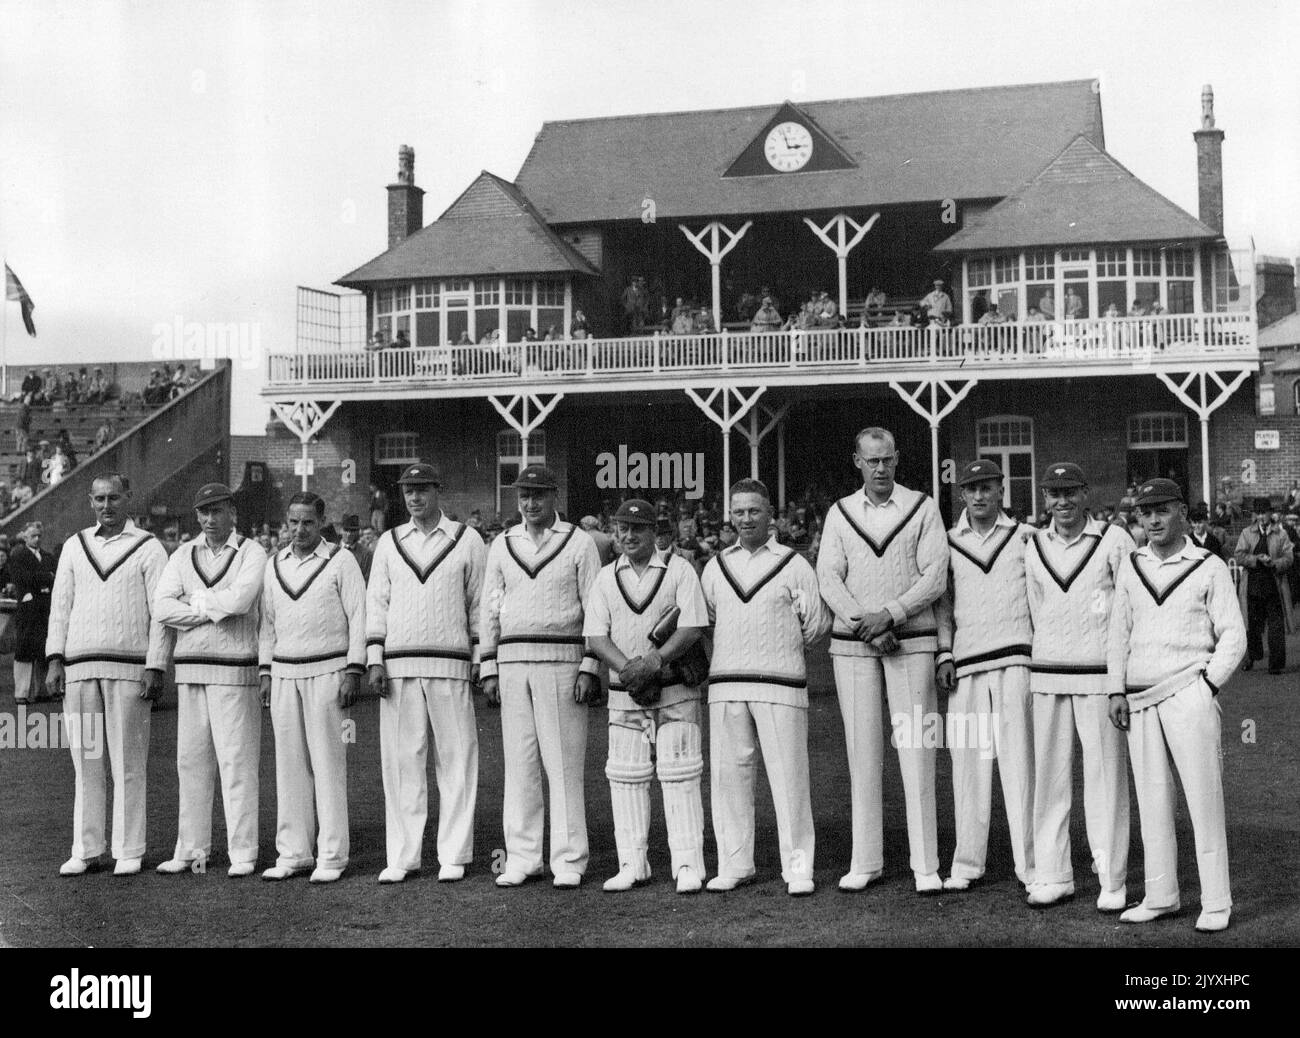 Opening of Scarbobough Cricket Festival With A Match - M.C.C. V. Yorkshire, the County Champions. First Day - M.O.C. 180 for four wickets. Play delayed by rain. The team, representing Yorkshire, the Champion County. September 4, 1938. (Photo by Sport & General Press Agency, Limited). Stock Photo